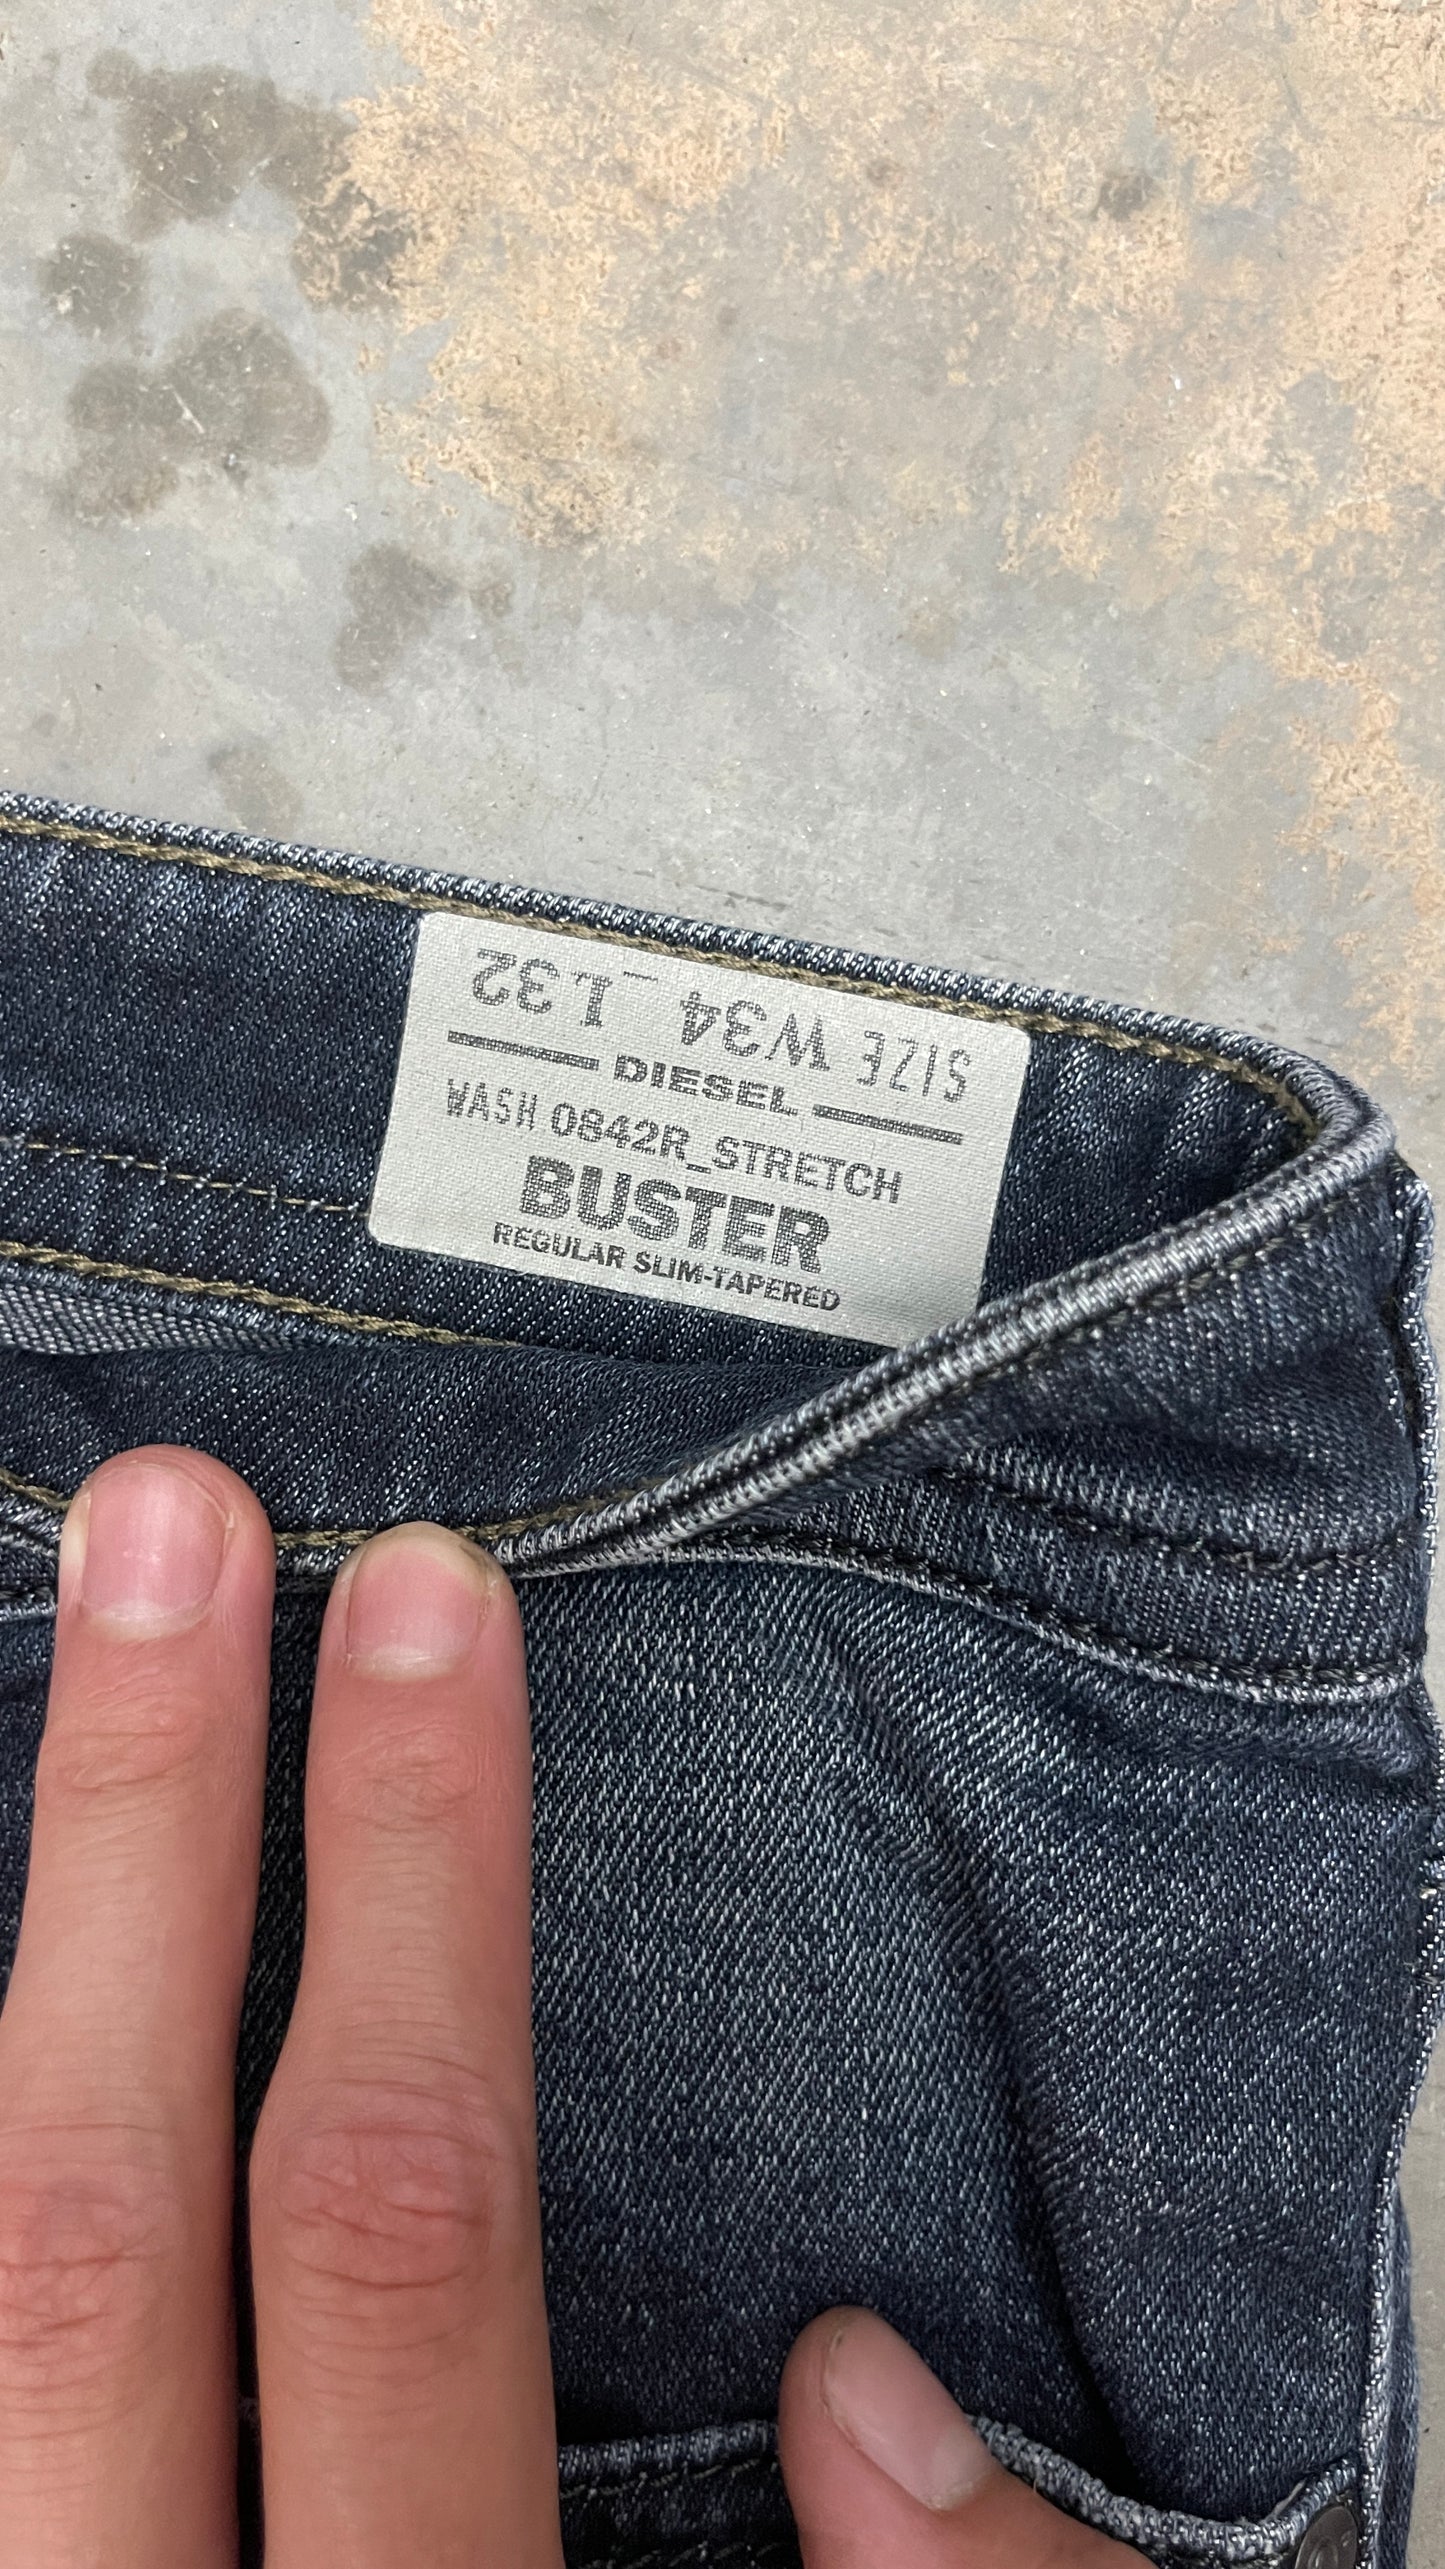 Diesel Jeans - BUSTER  Size: 34x32